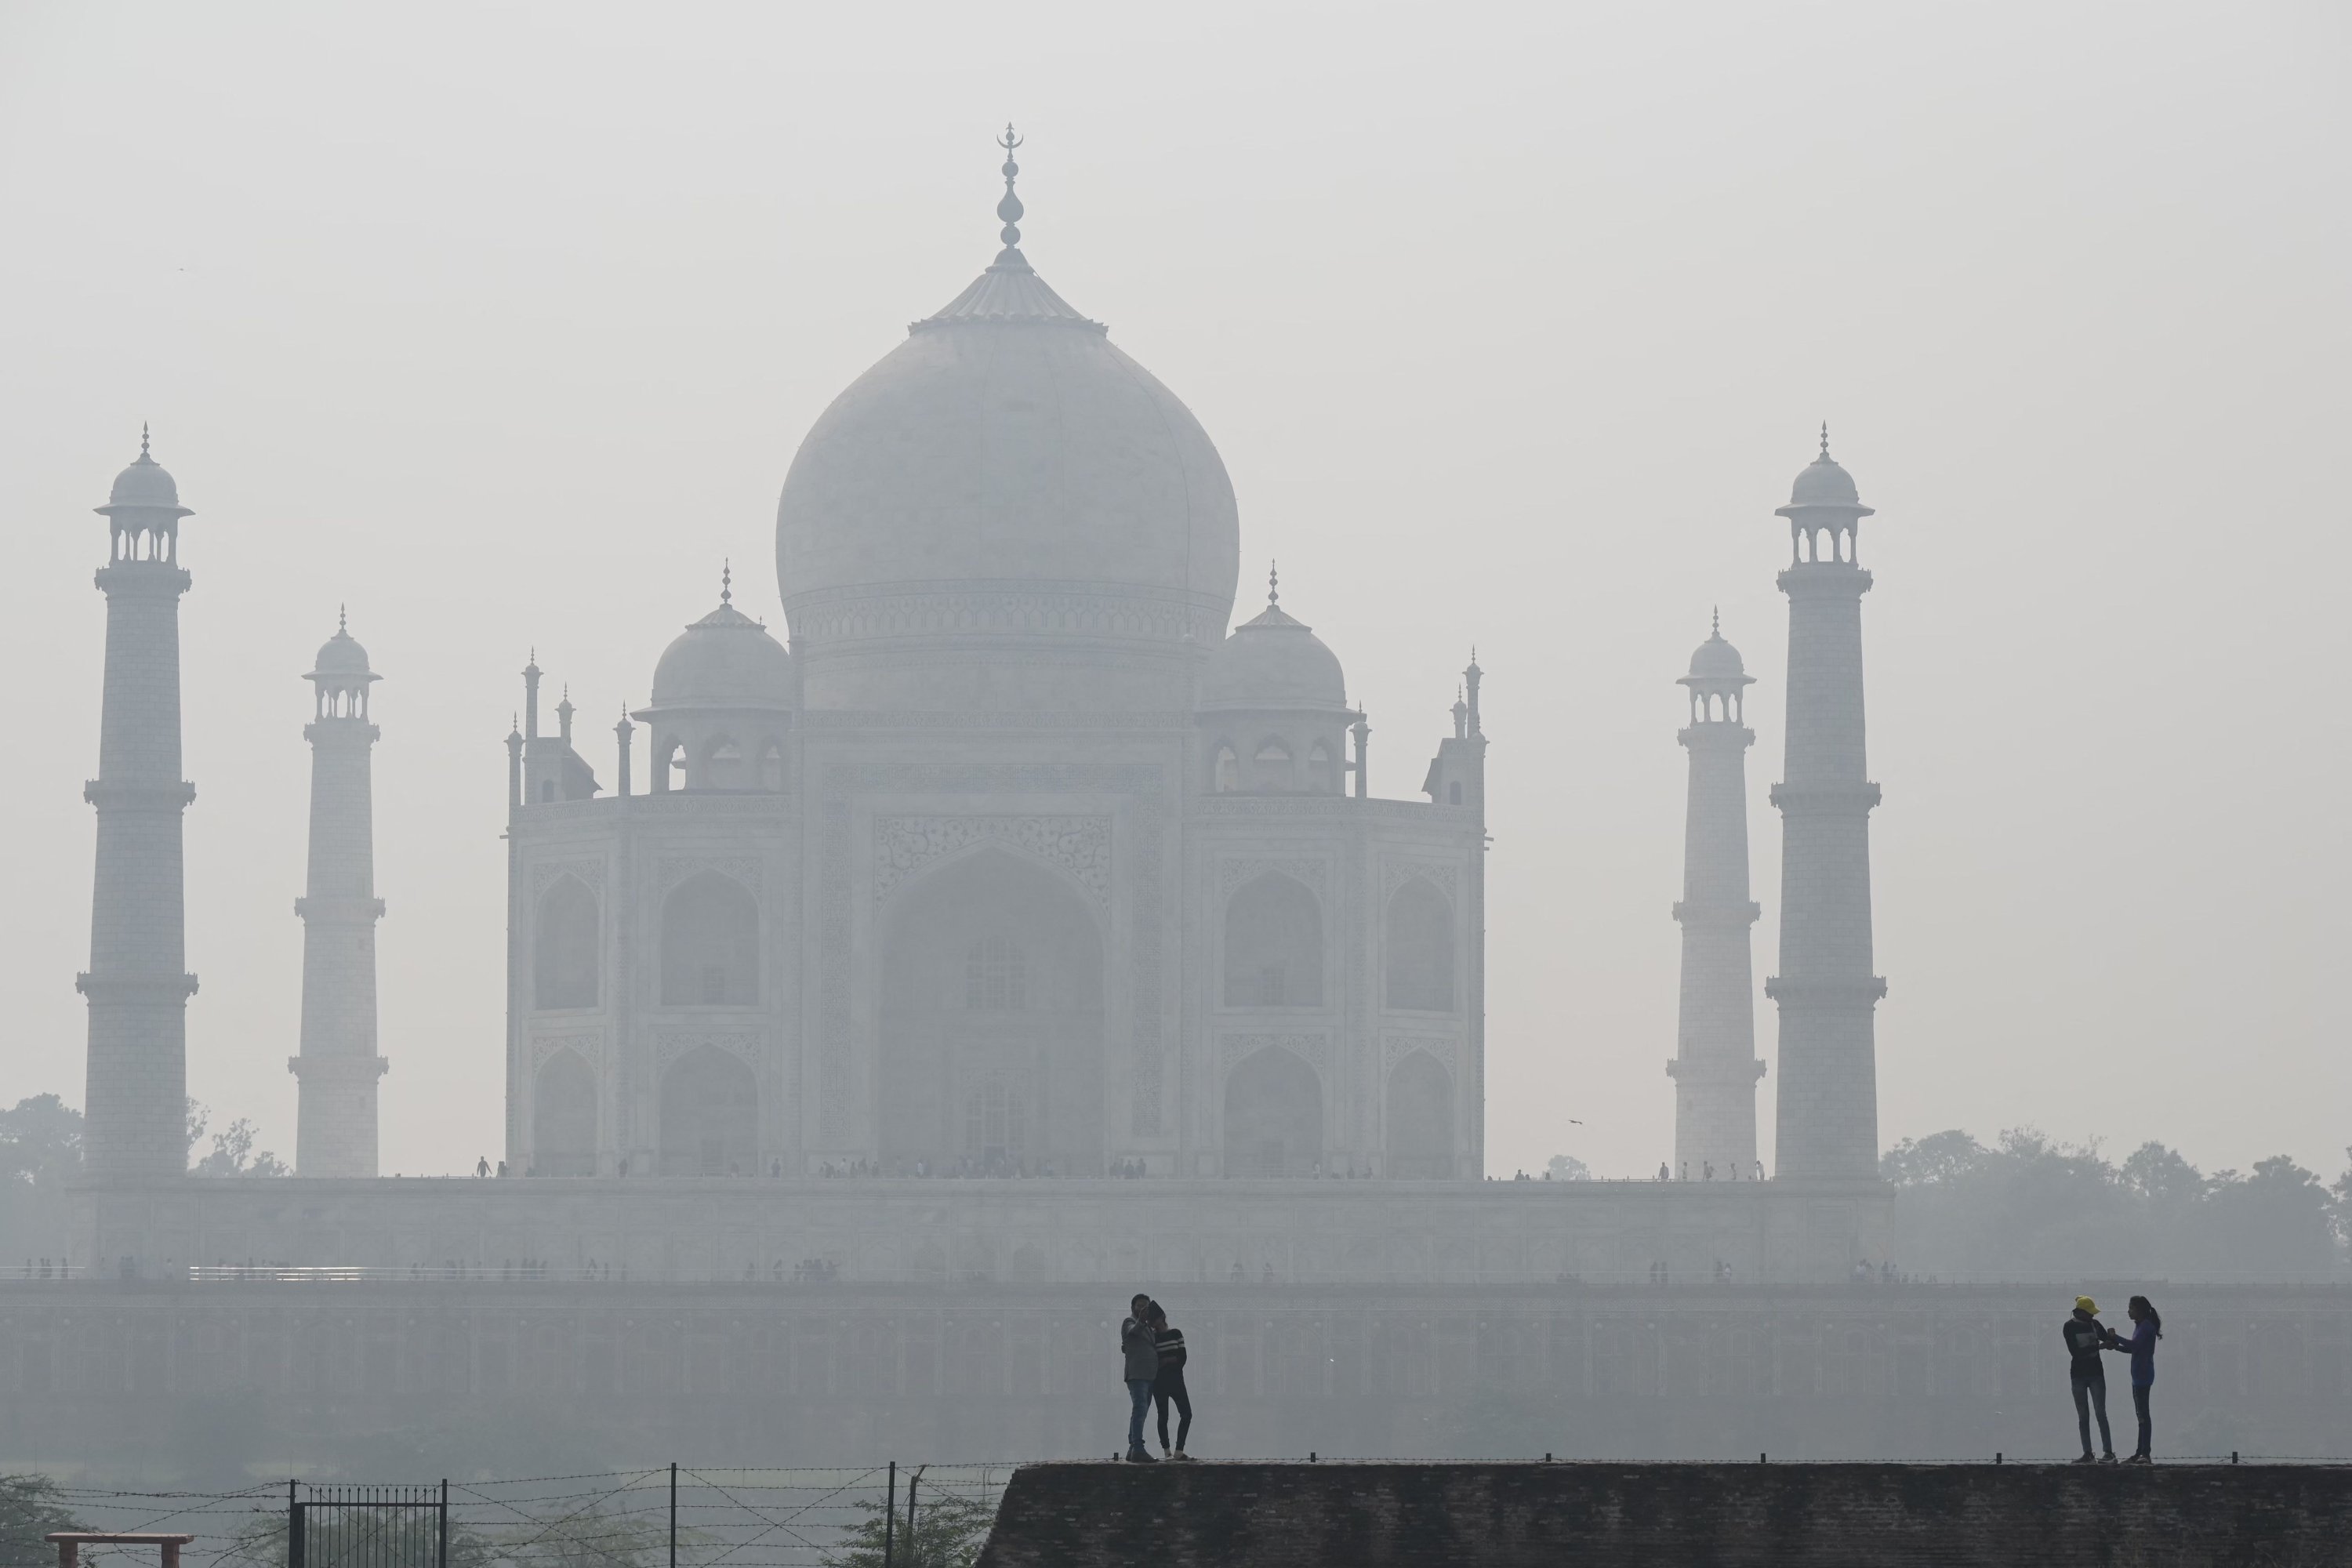 People visit the Mehtab Bagh complex behind the Taj Mahal amid smoggy conditions in Agra, India, Nov. 16, 2021. (AFP Photo)